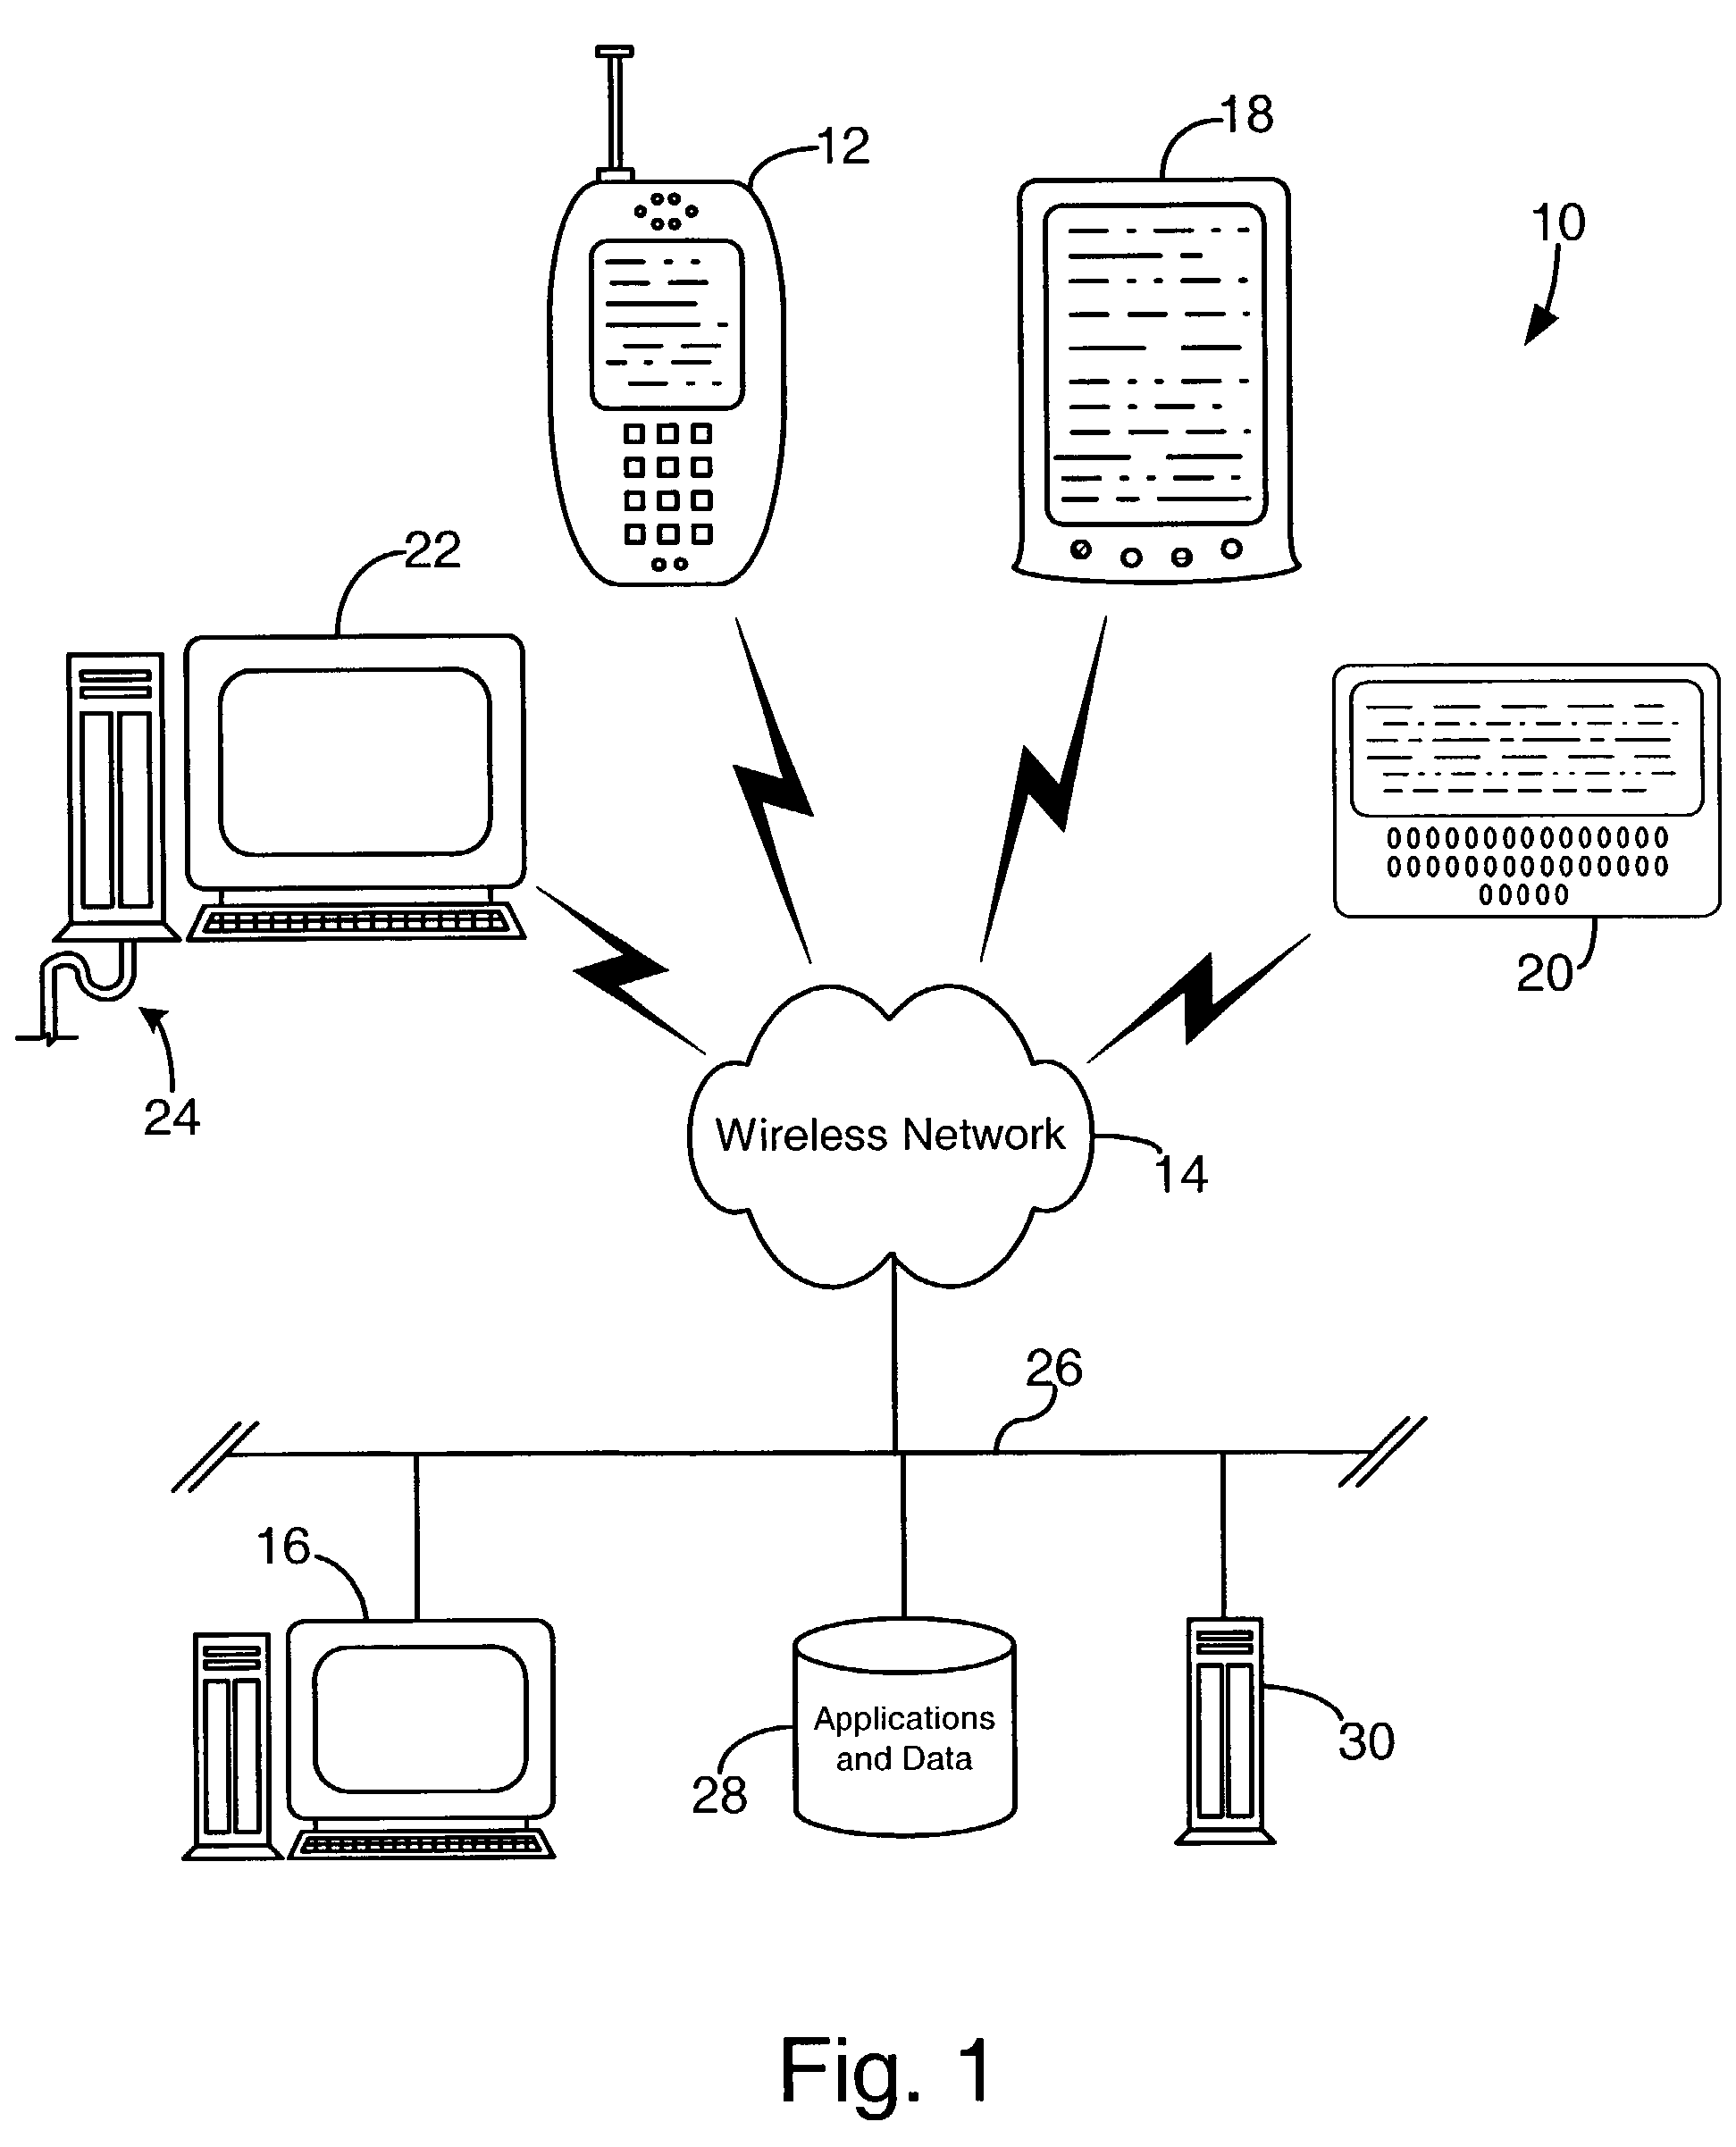 Data channel resource optimization for devices in a network